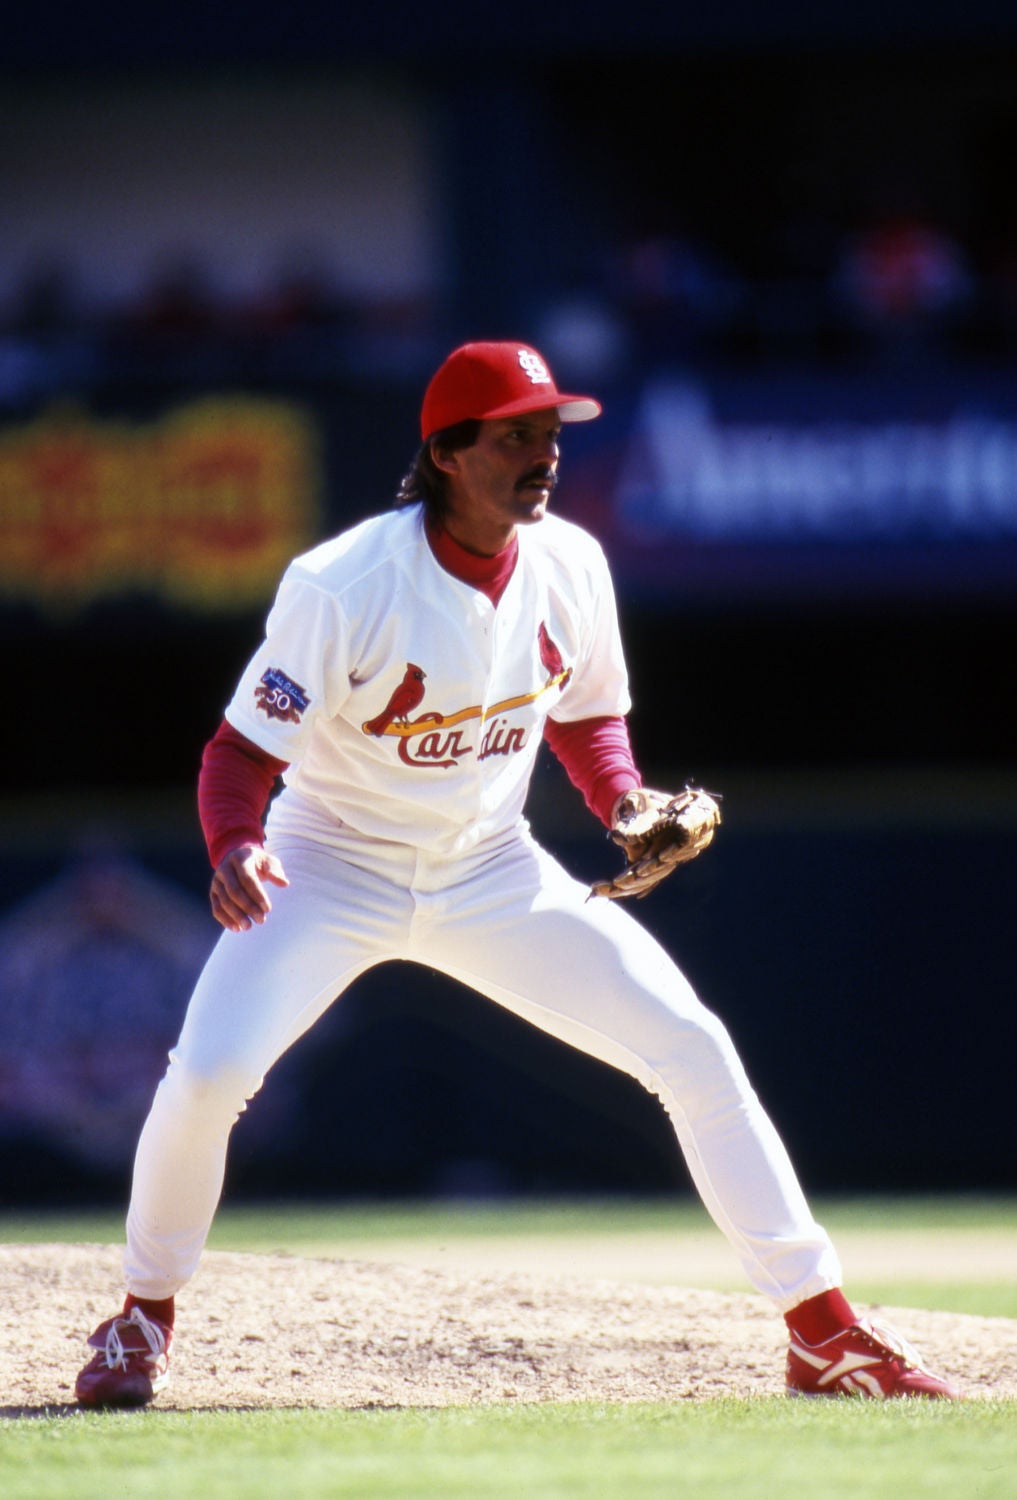 Cardinals acquire Eckersley from Athletics | Baseball Hall of Fame